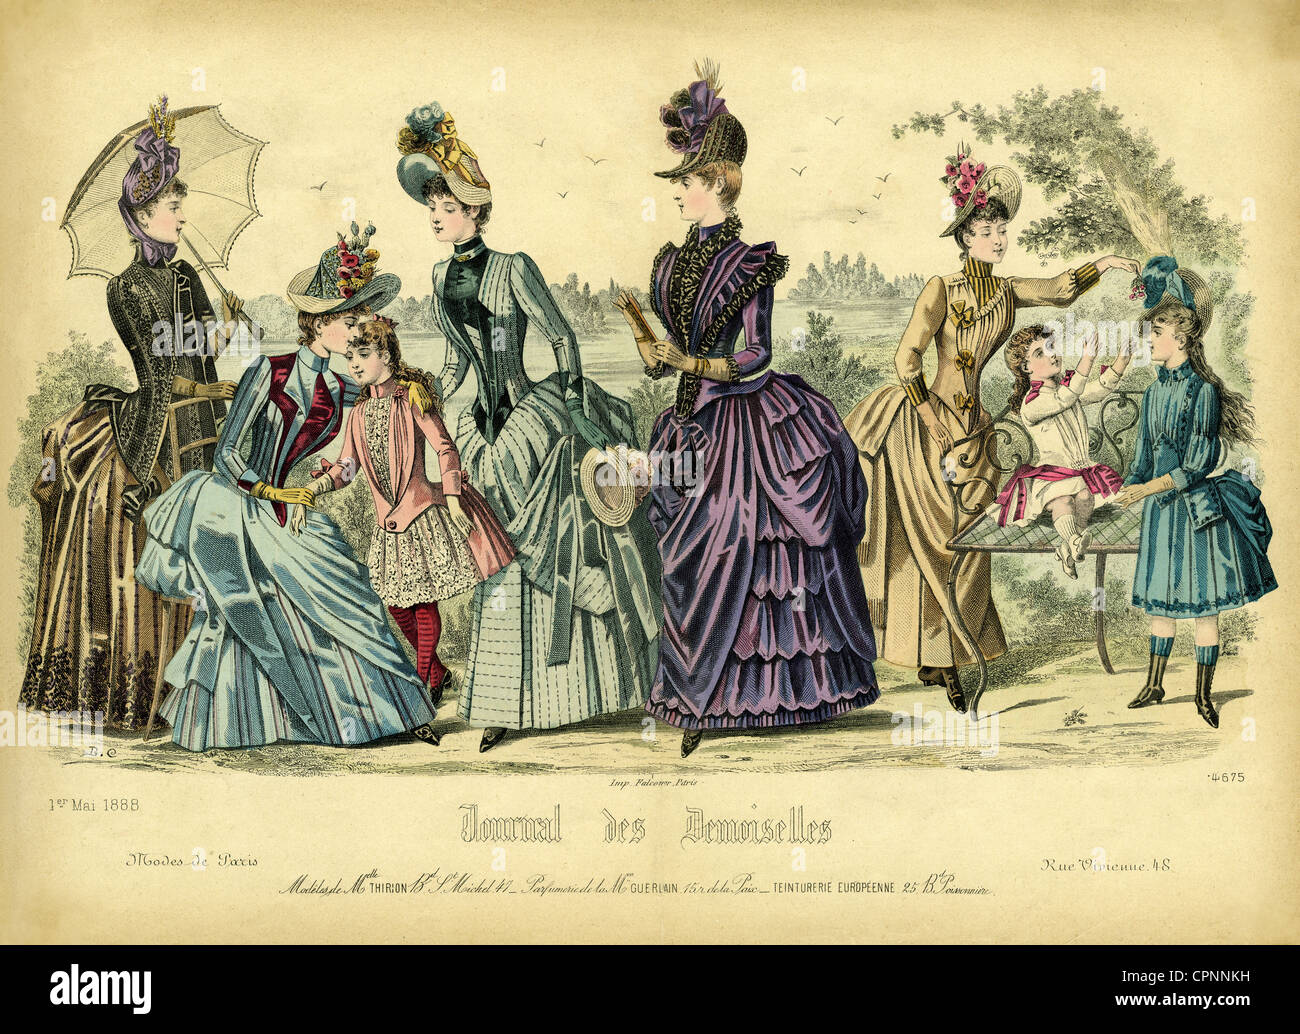 fashion, Paris fashion, women and children, out of the fashion magazine "Journal des Demoiselles", France, 1888, Additional-Rights-Clearences-Not Available Stock Photo